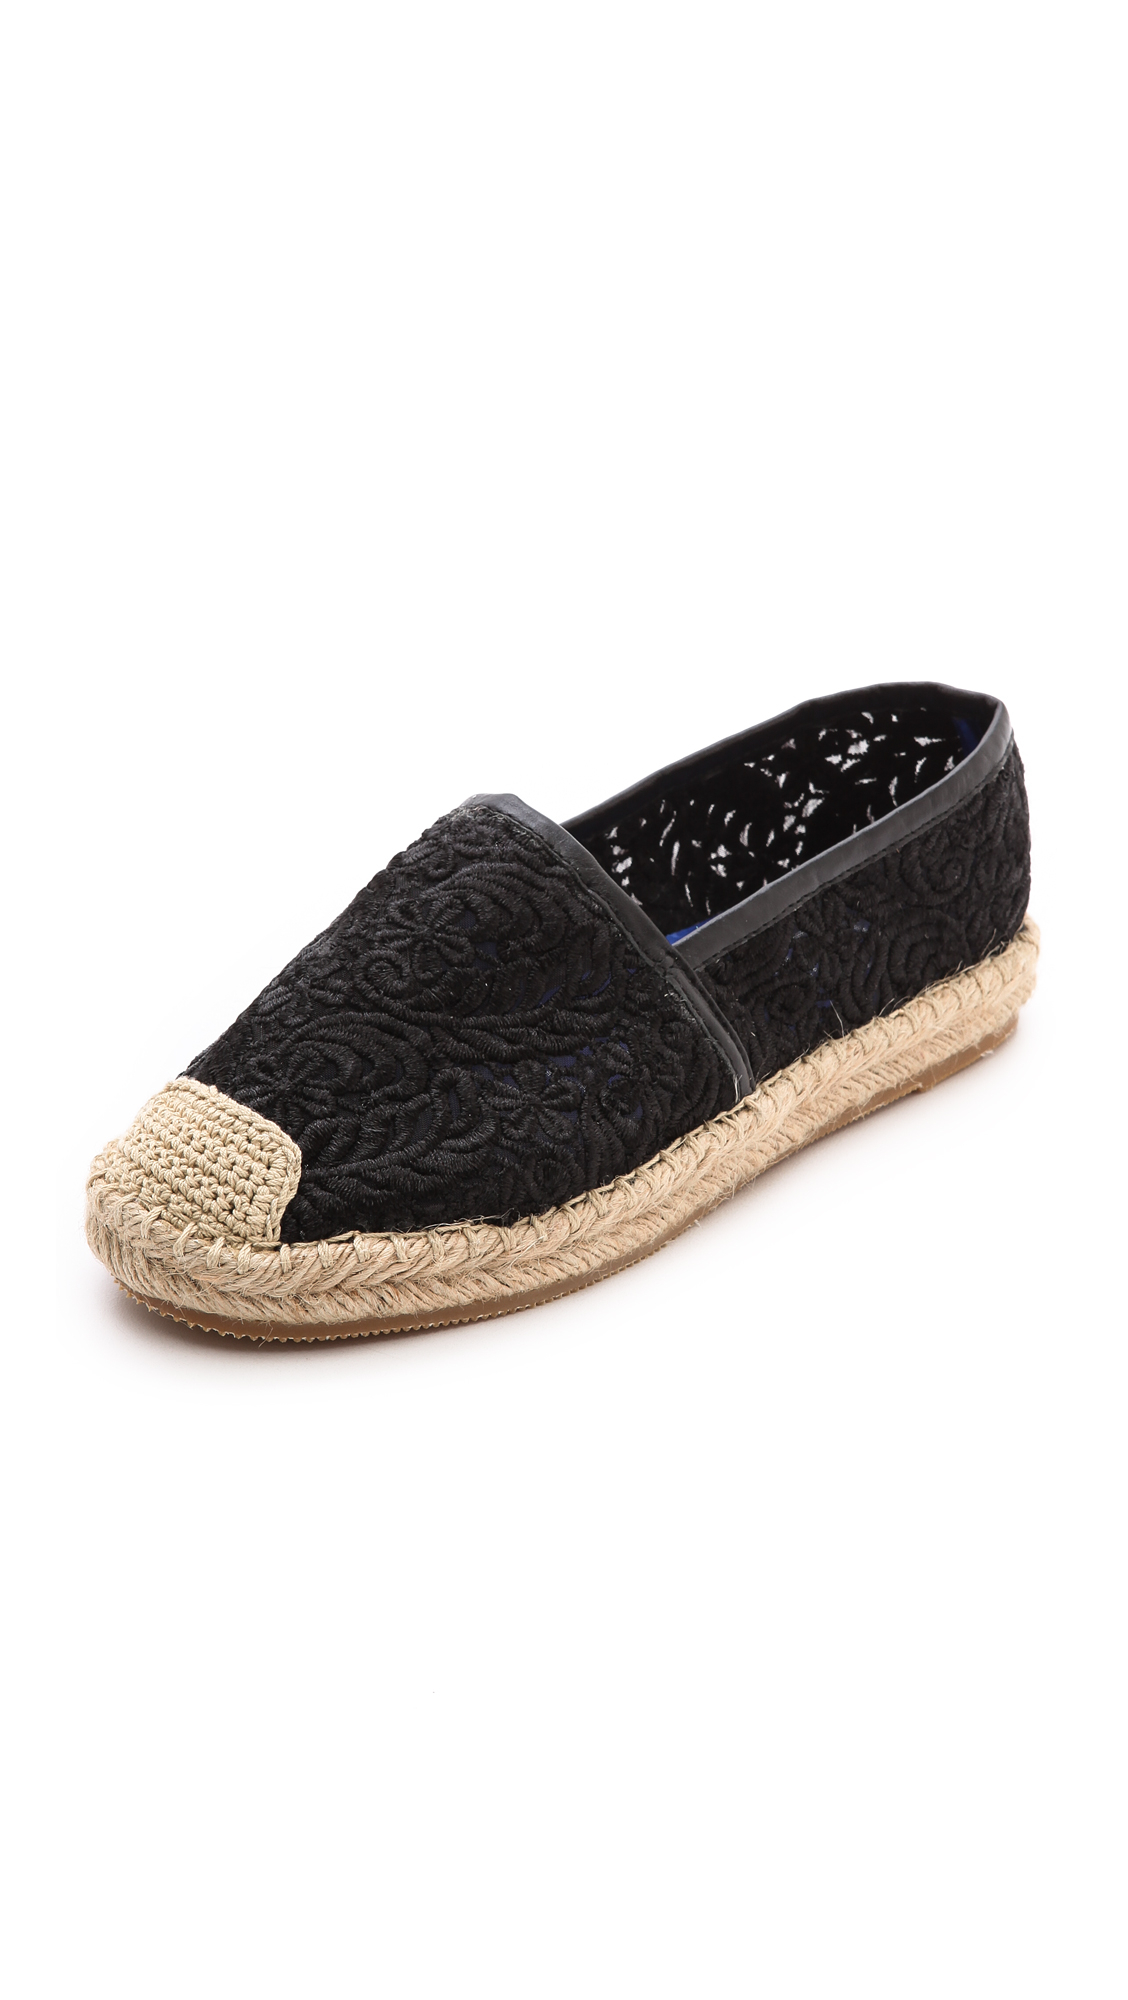 Jeffrey Campbell Nia Lace Espadrilles in Black - Lyst